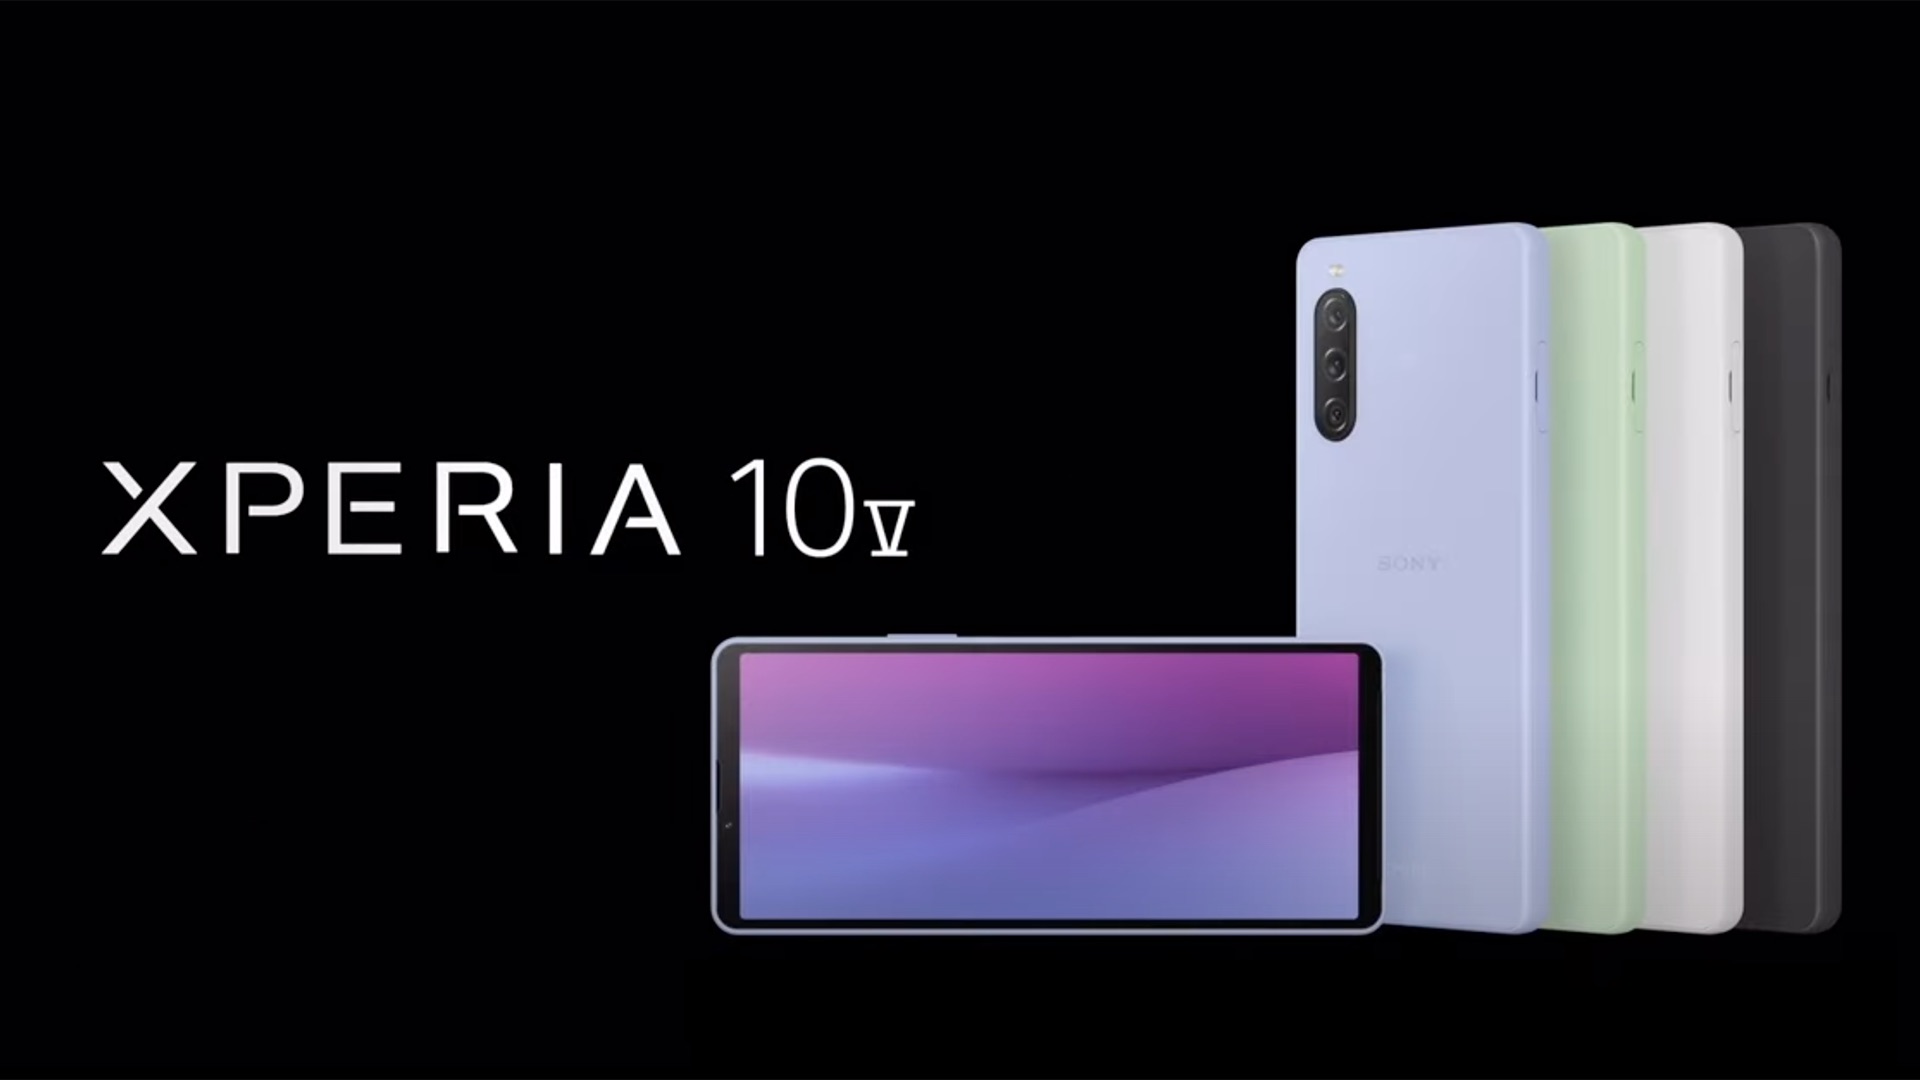 Sony Xperia 1 V Flagship and Xperia 10 V Entry-Level Phones Introduced ...